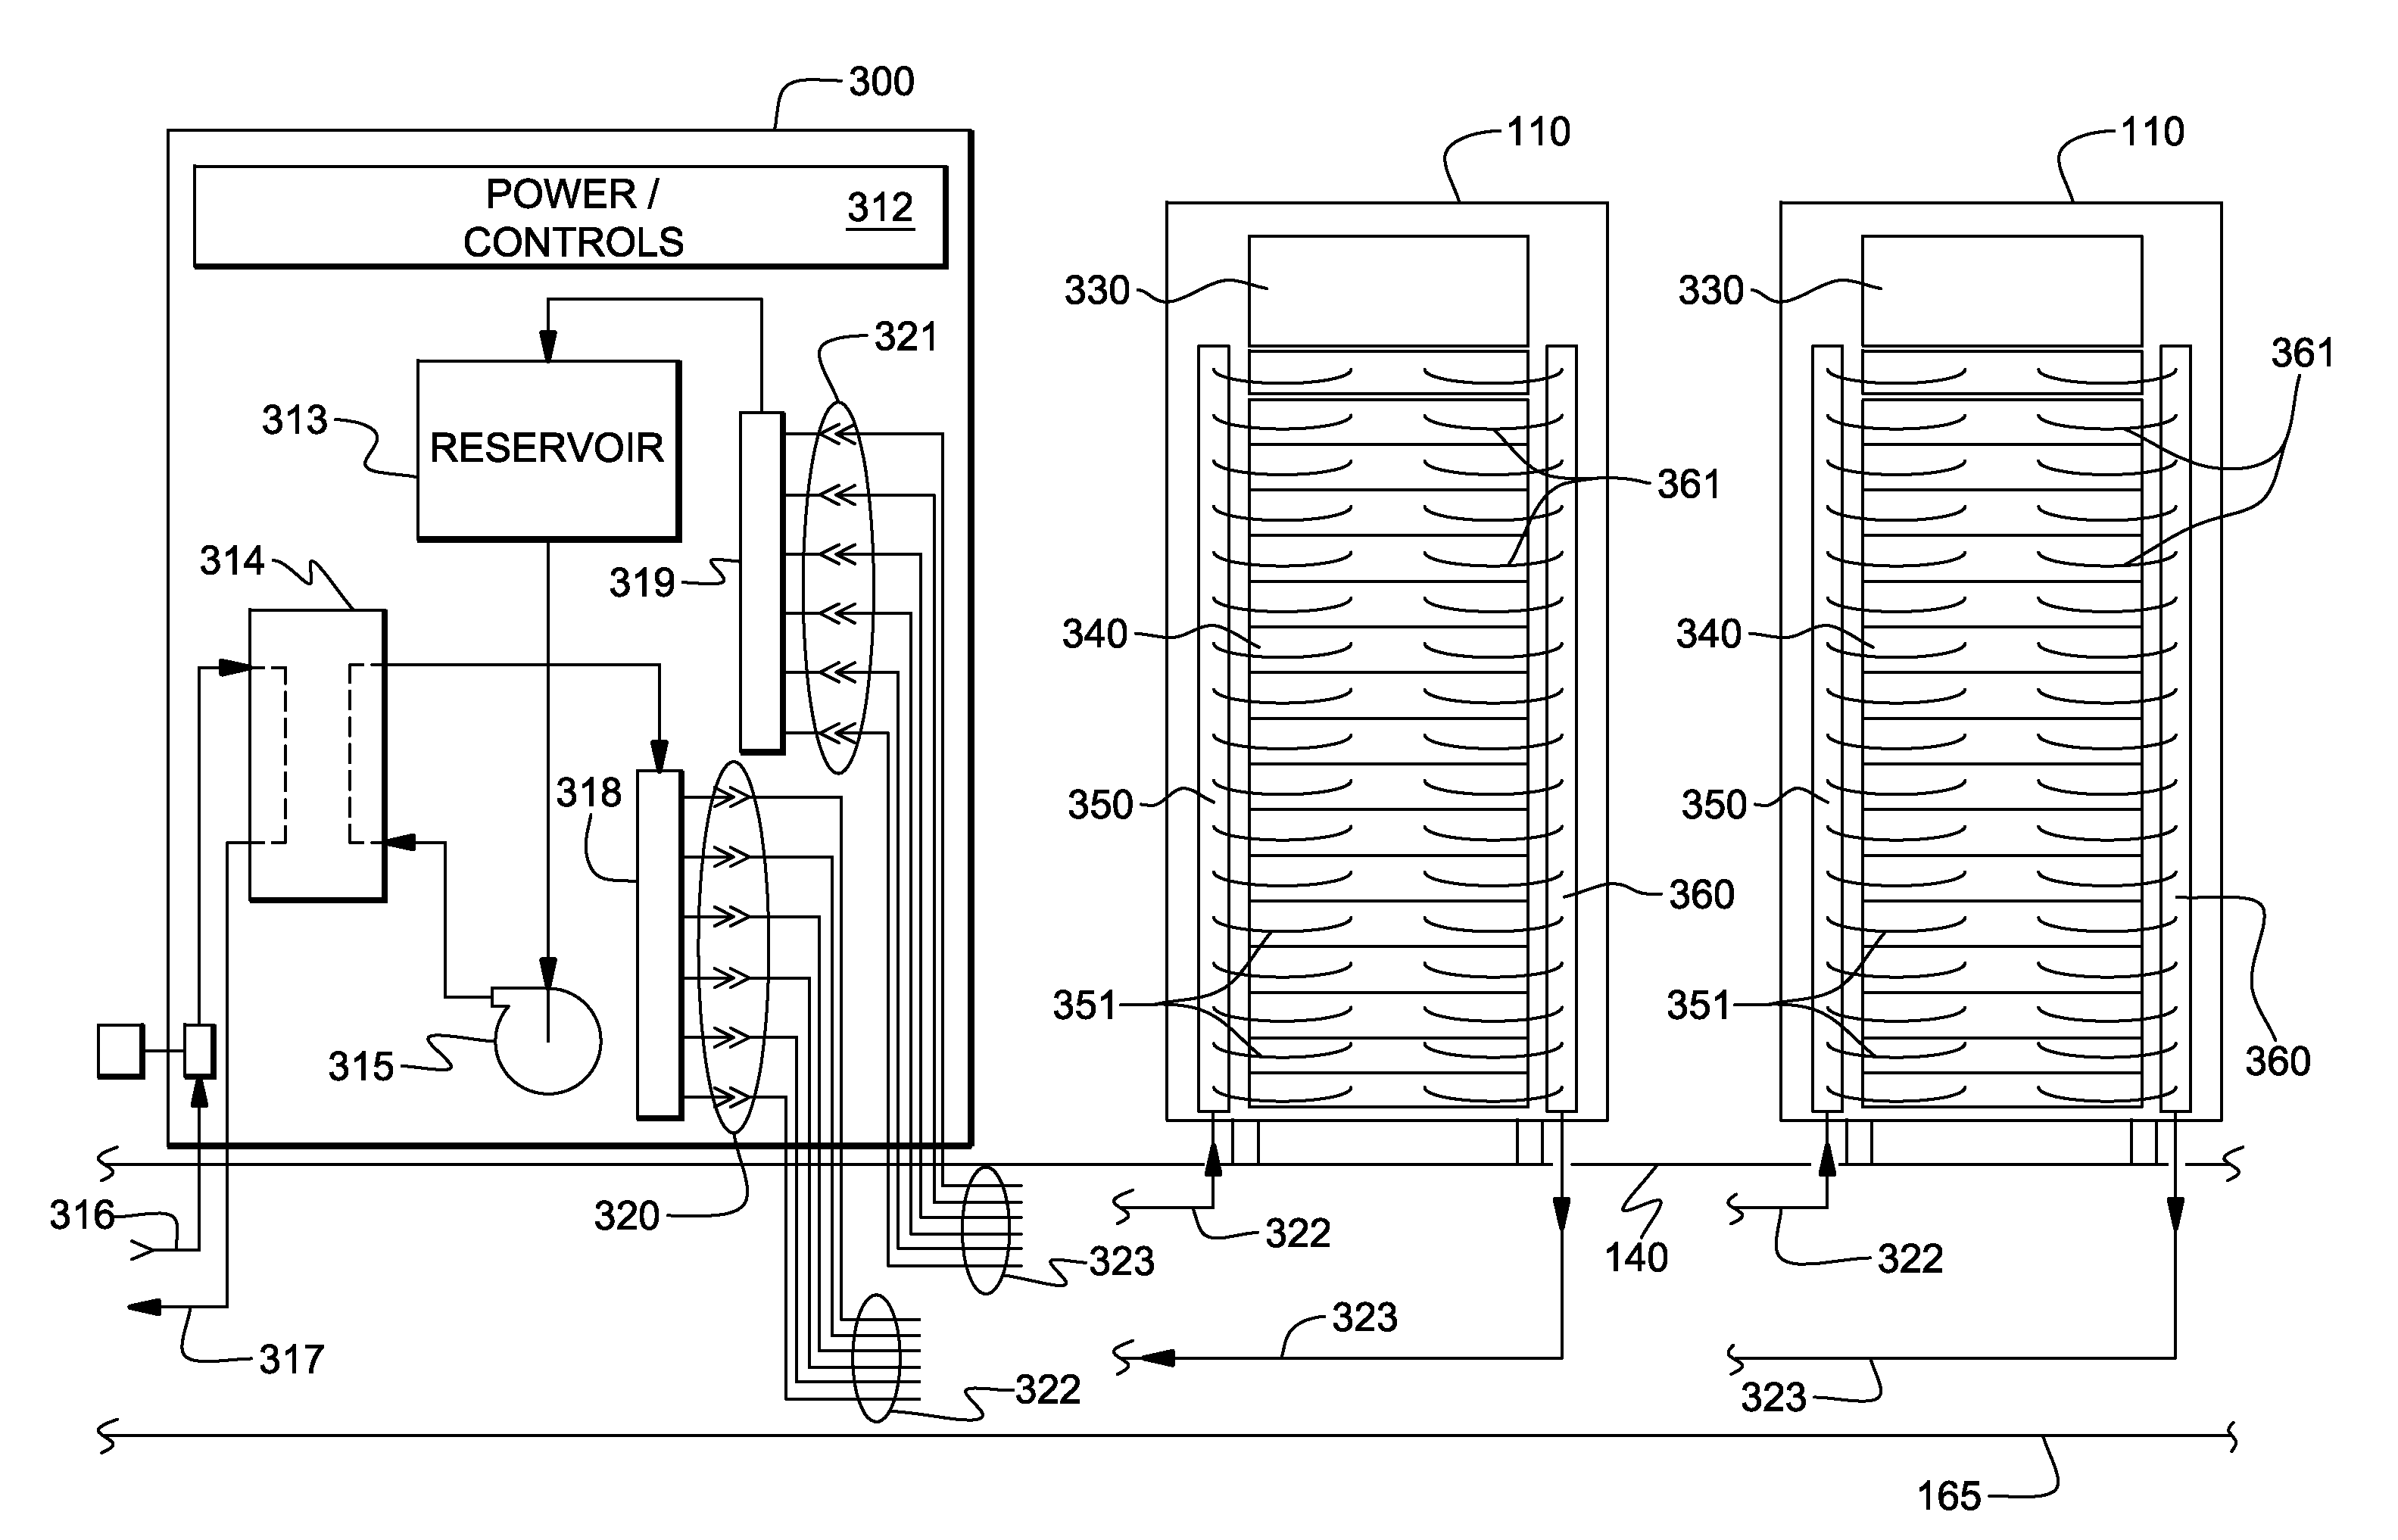 Cooled electronic system with liquid-cooled cold plate and thermal spreader coupled to electronic component